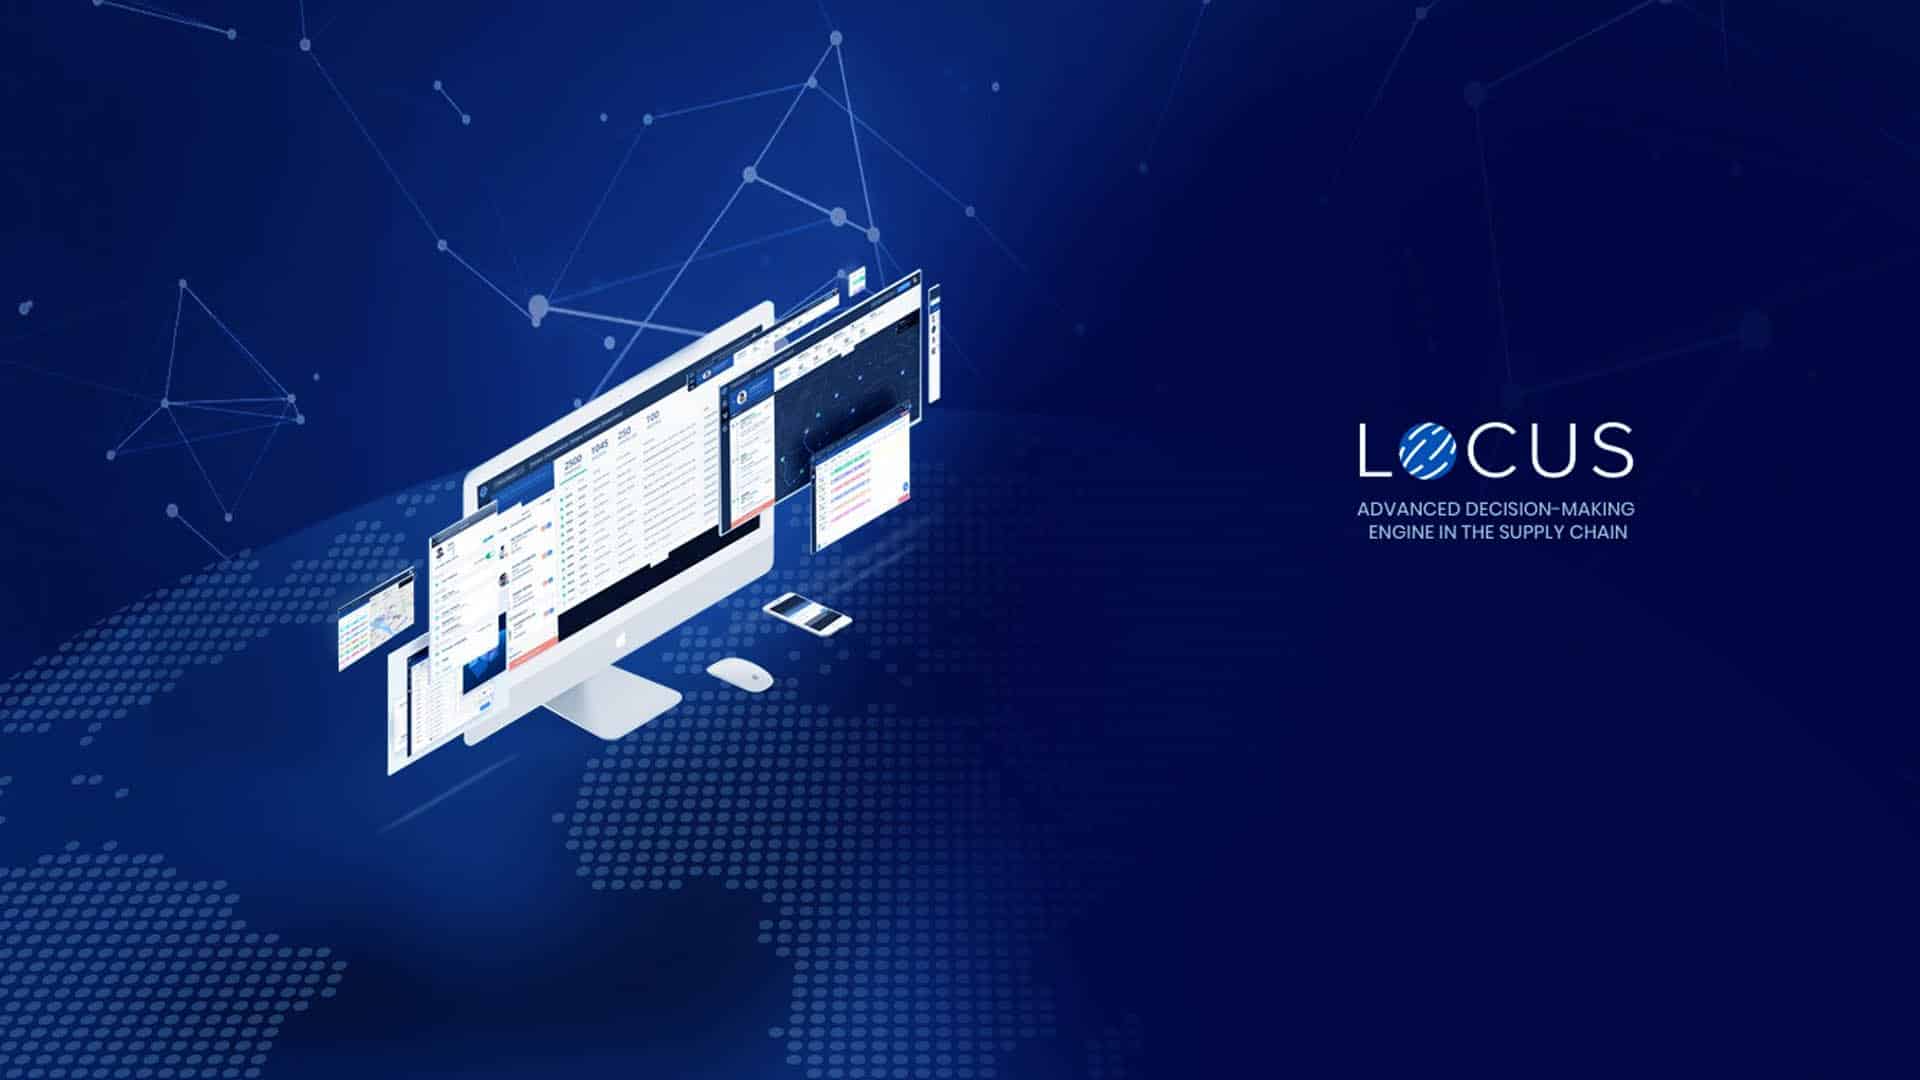 Supply chain automating co Locus raises USD 50 mln